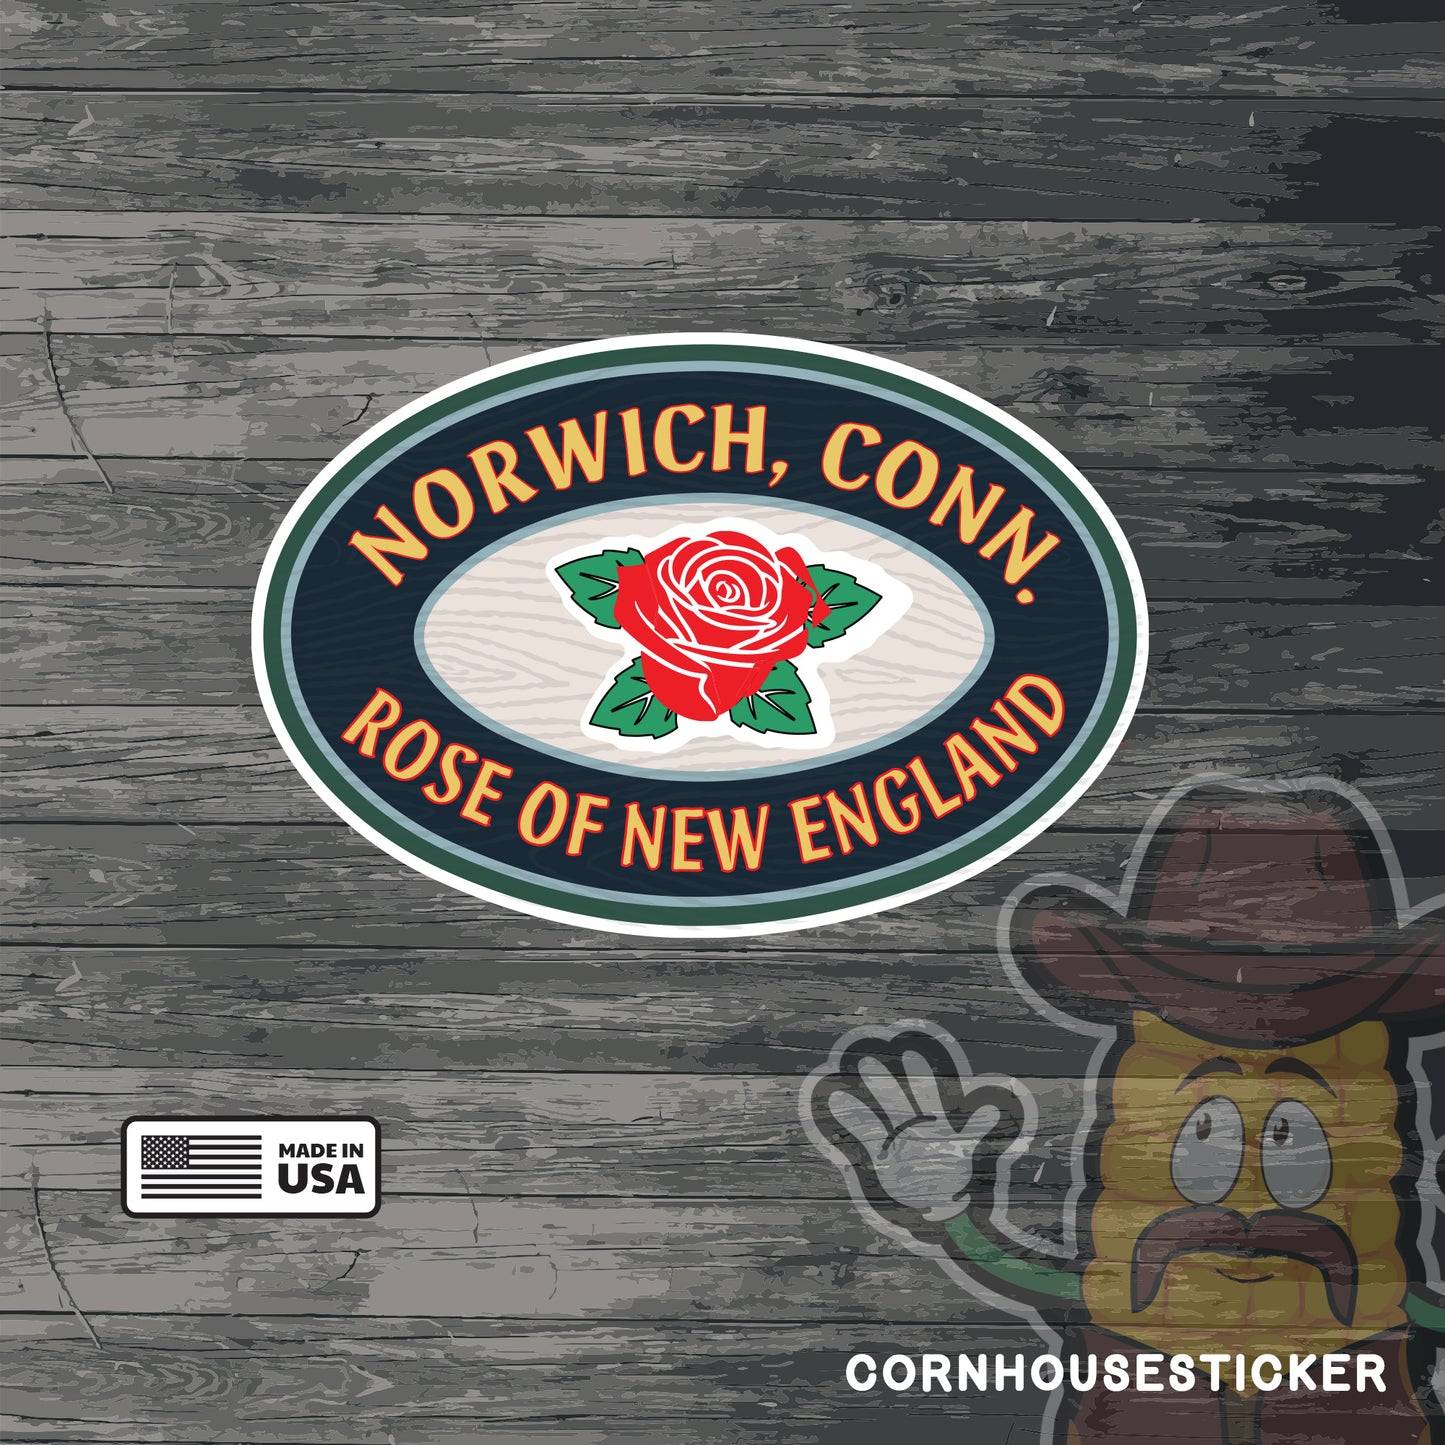 Norwich, CT Rose of New England sticker